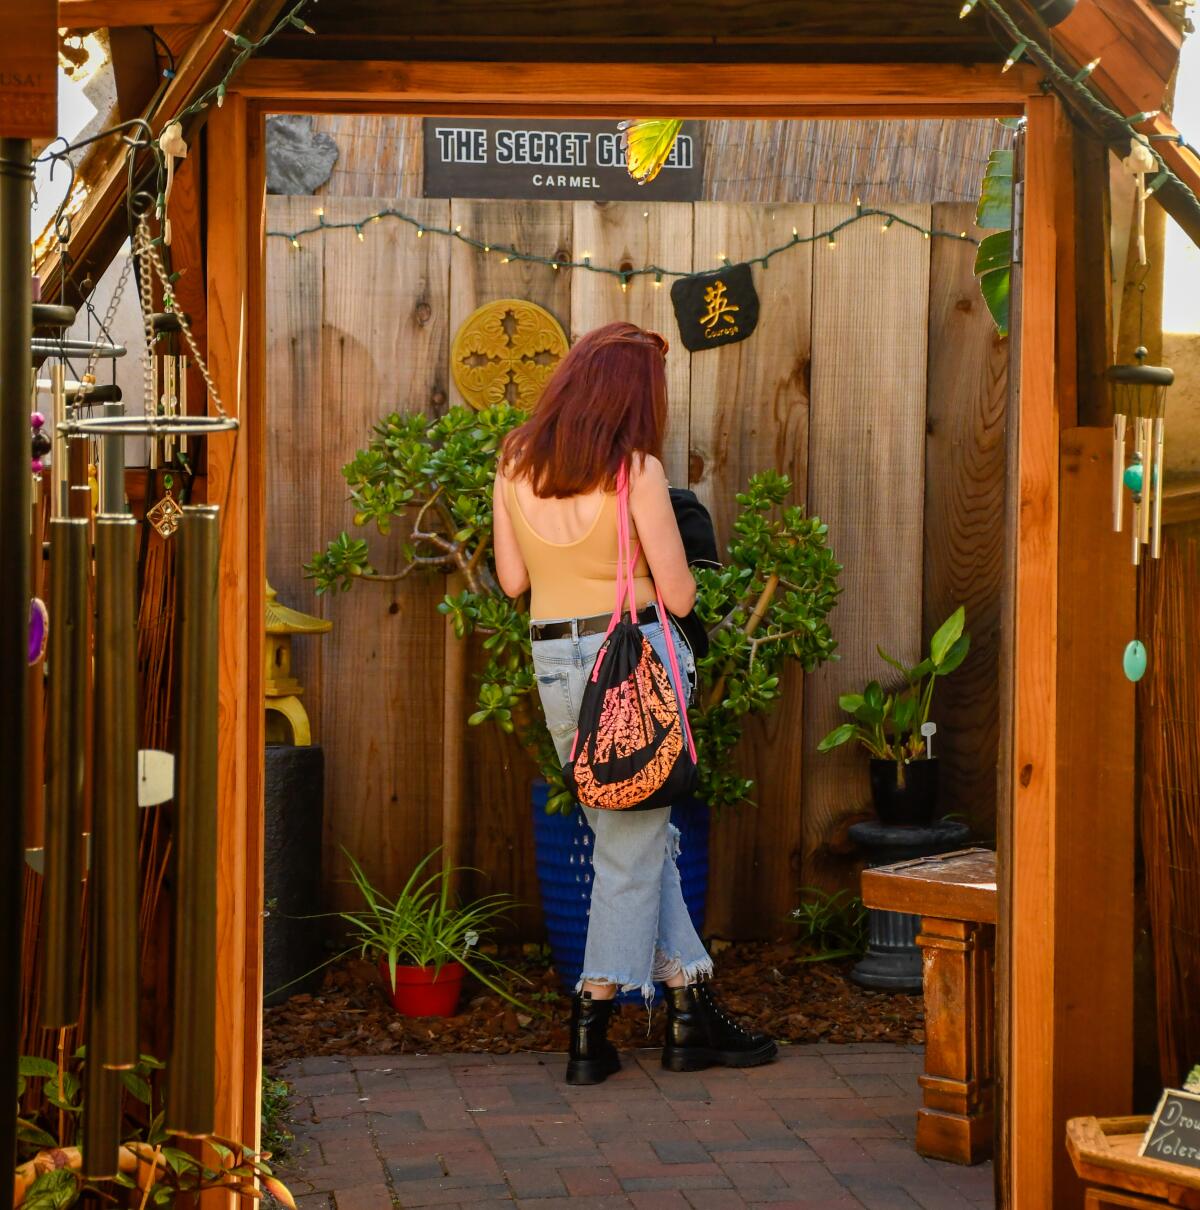 The Pilgrim's Way Books in Carmel include a "secret" garden at the back. 